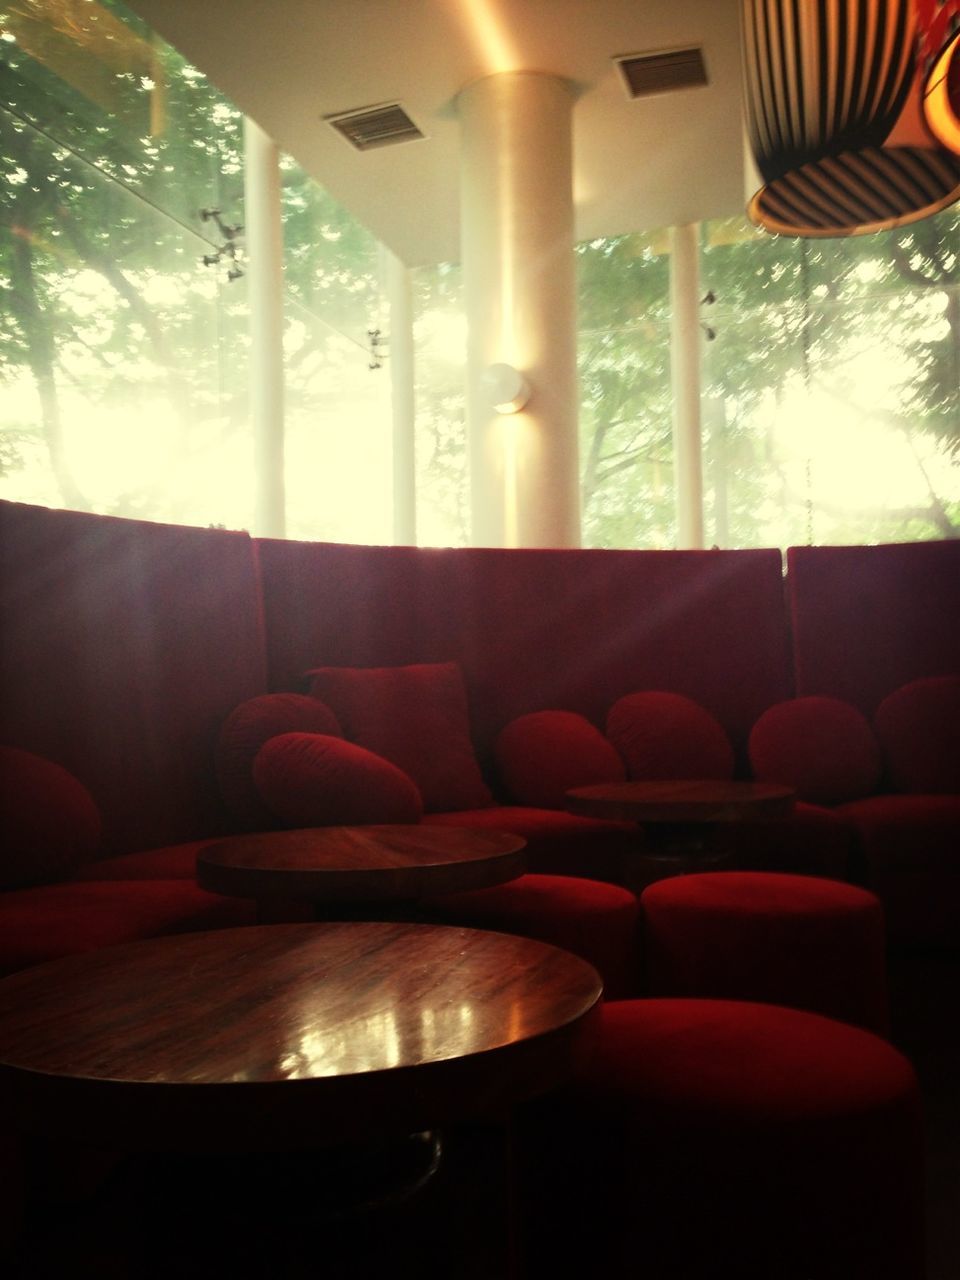 indoors, window, glass - material, chair, transparent, home interior, sunlight, curtain, absence, table, tree, empty, no people, lighting equipment, hanging, seat, day, house, restaurant, sunbeam